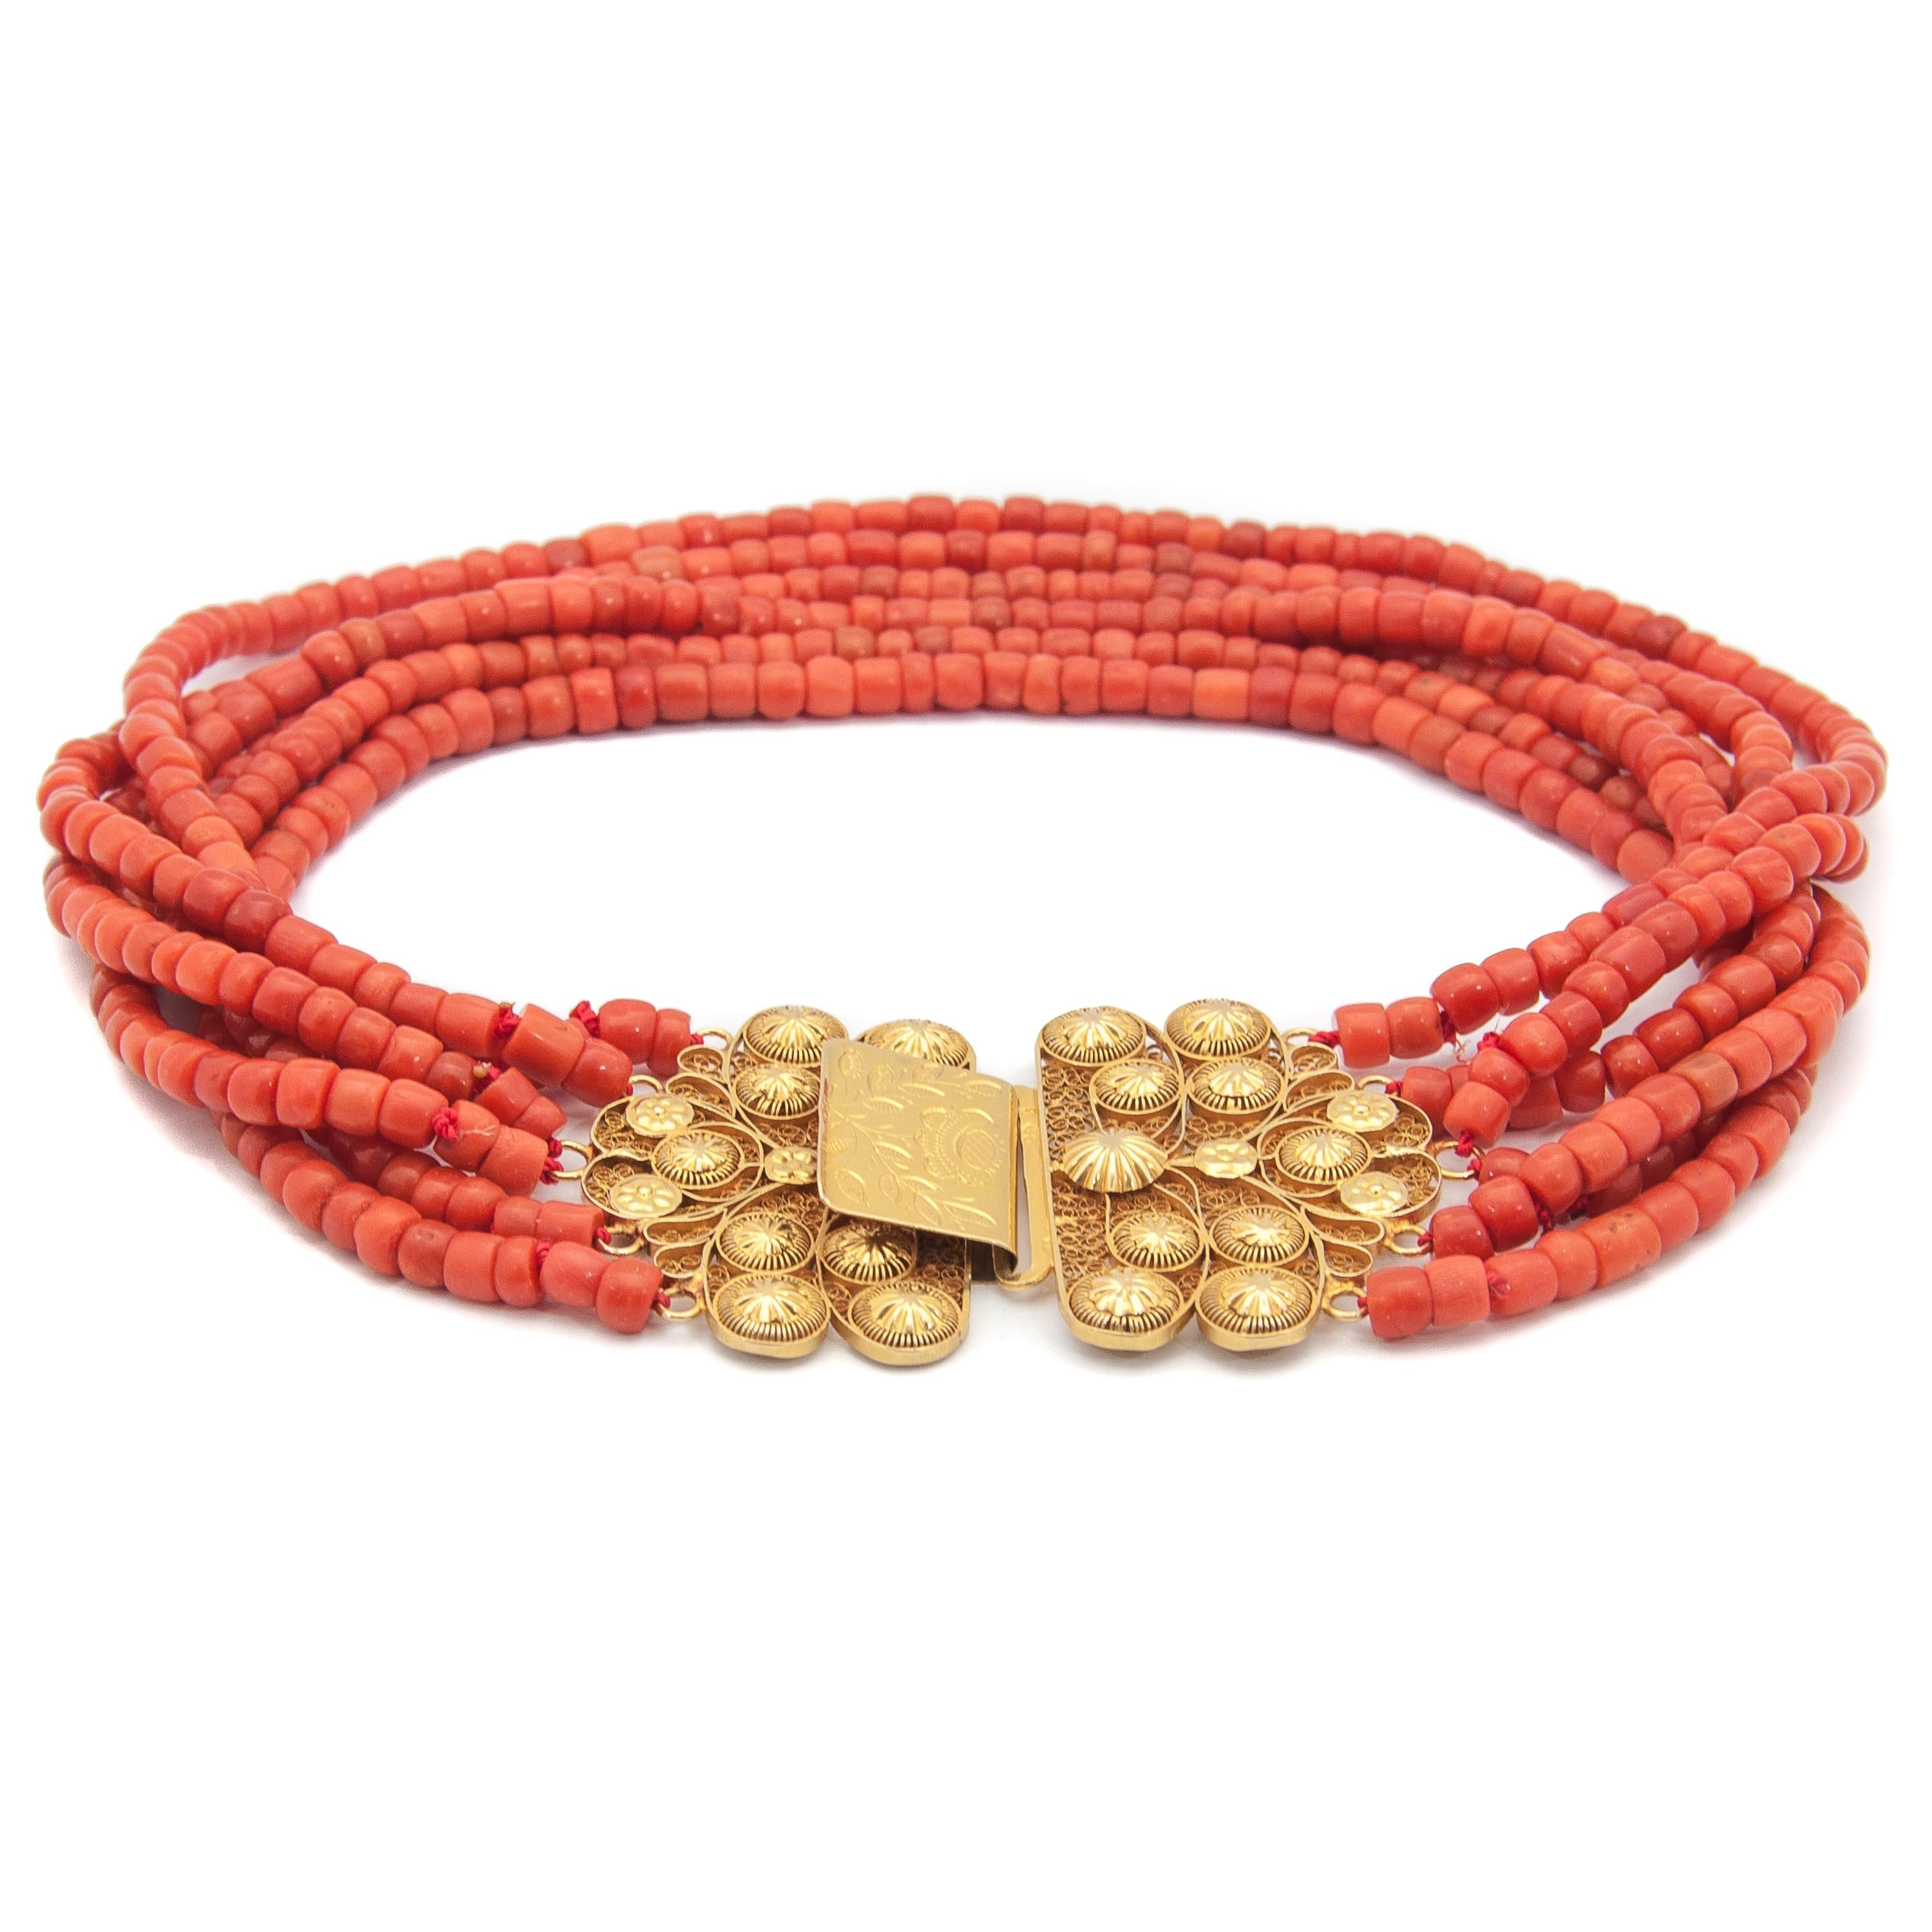 This antique 19th century coral necklace is set with a large 18 karat gold clasp. The clasp is made of fine filigree and cannetille work, the craftsmanship is stunning. The closure of the clasp has a lovely floral engraving. The six strands are